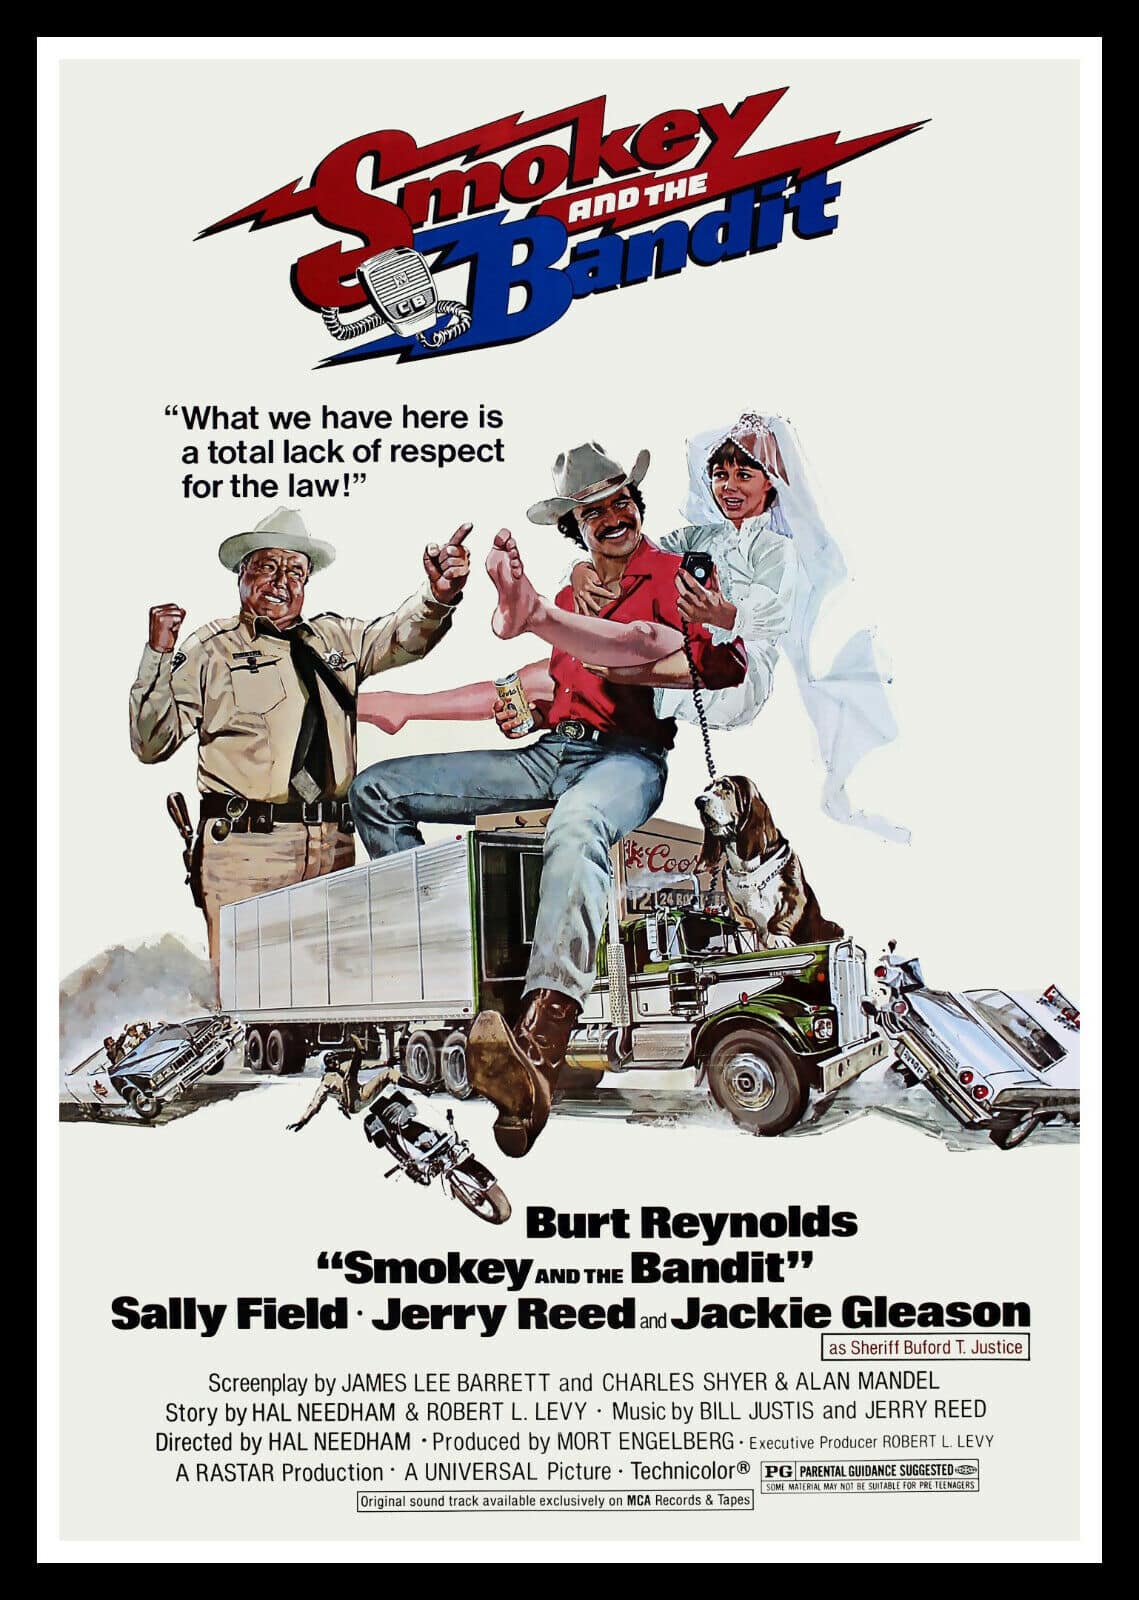 The movie poster for Smokey and the Bandit